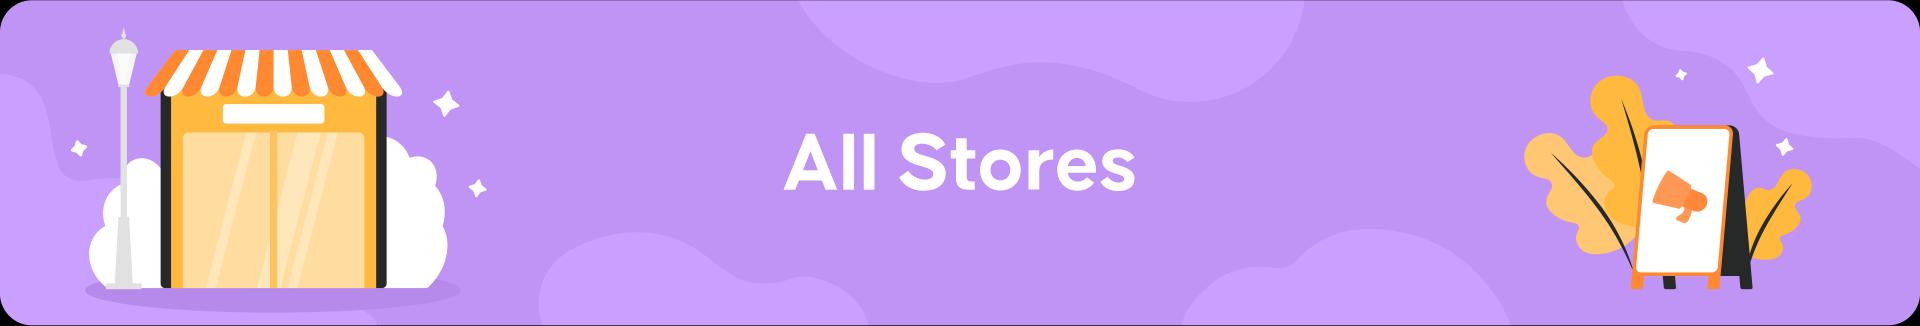 all stores